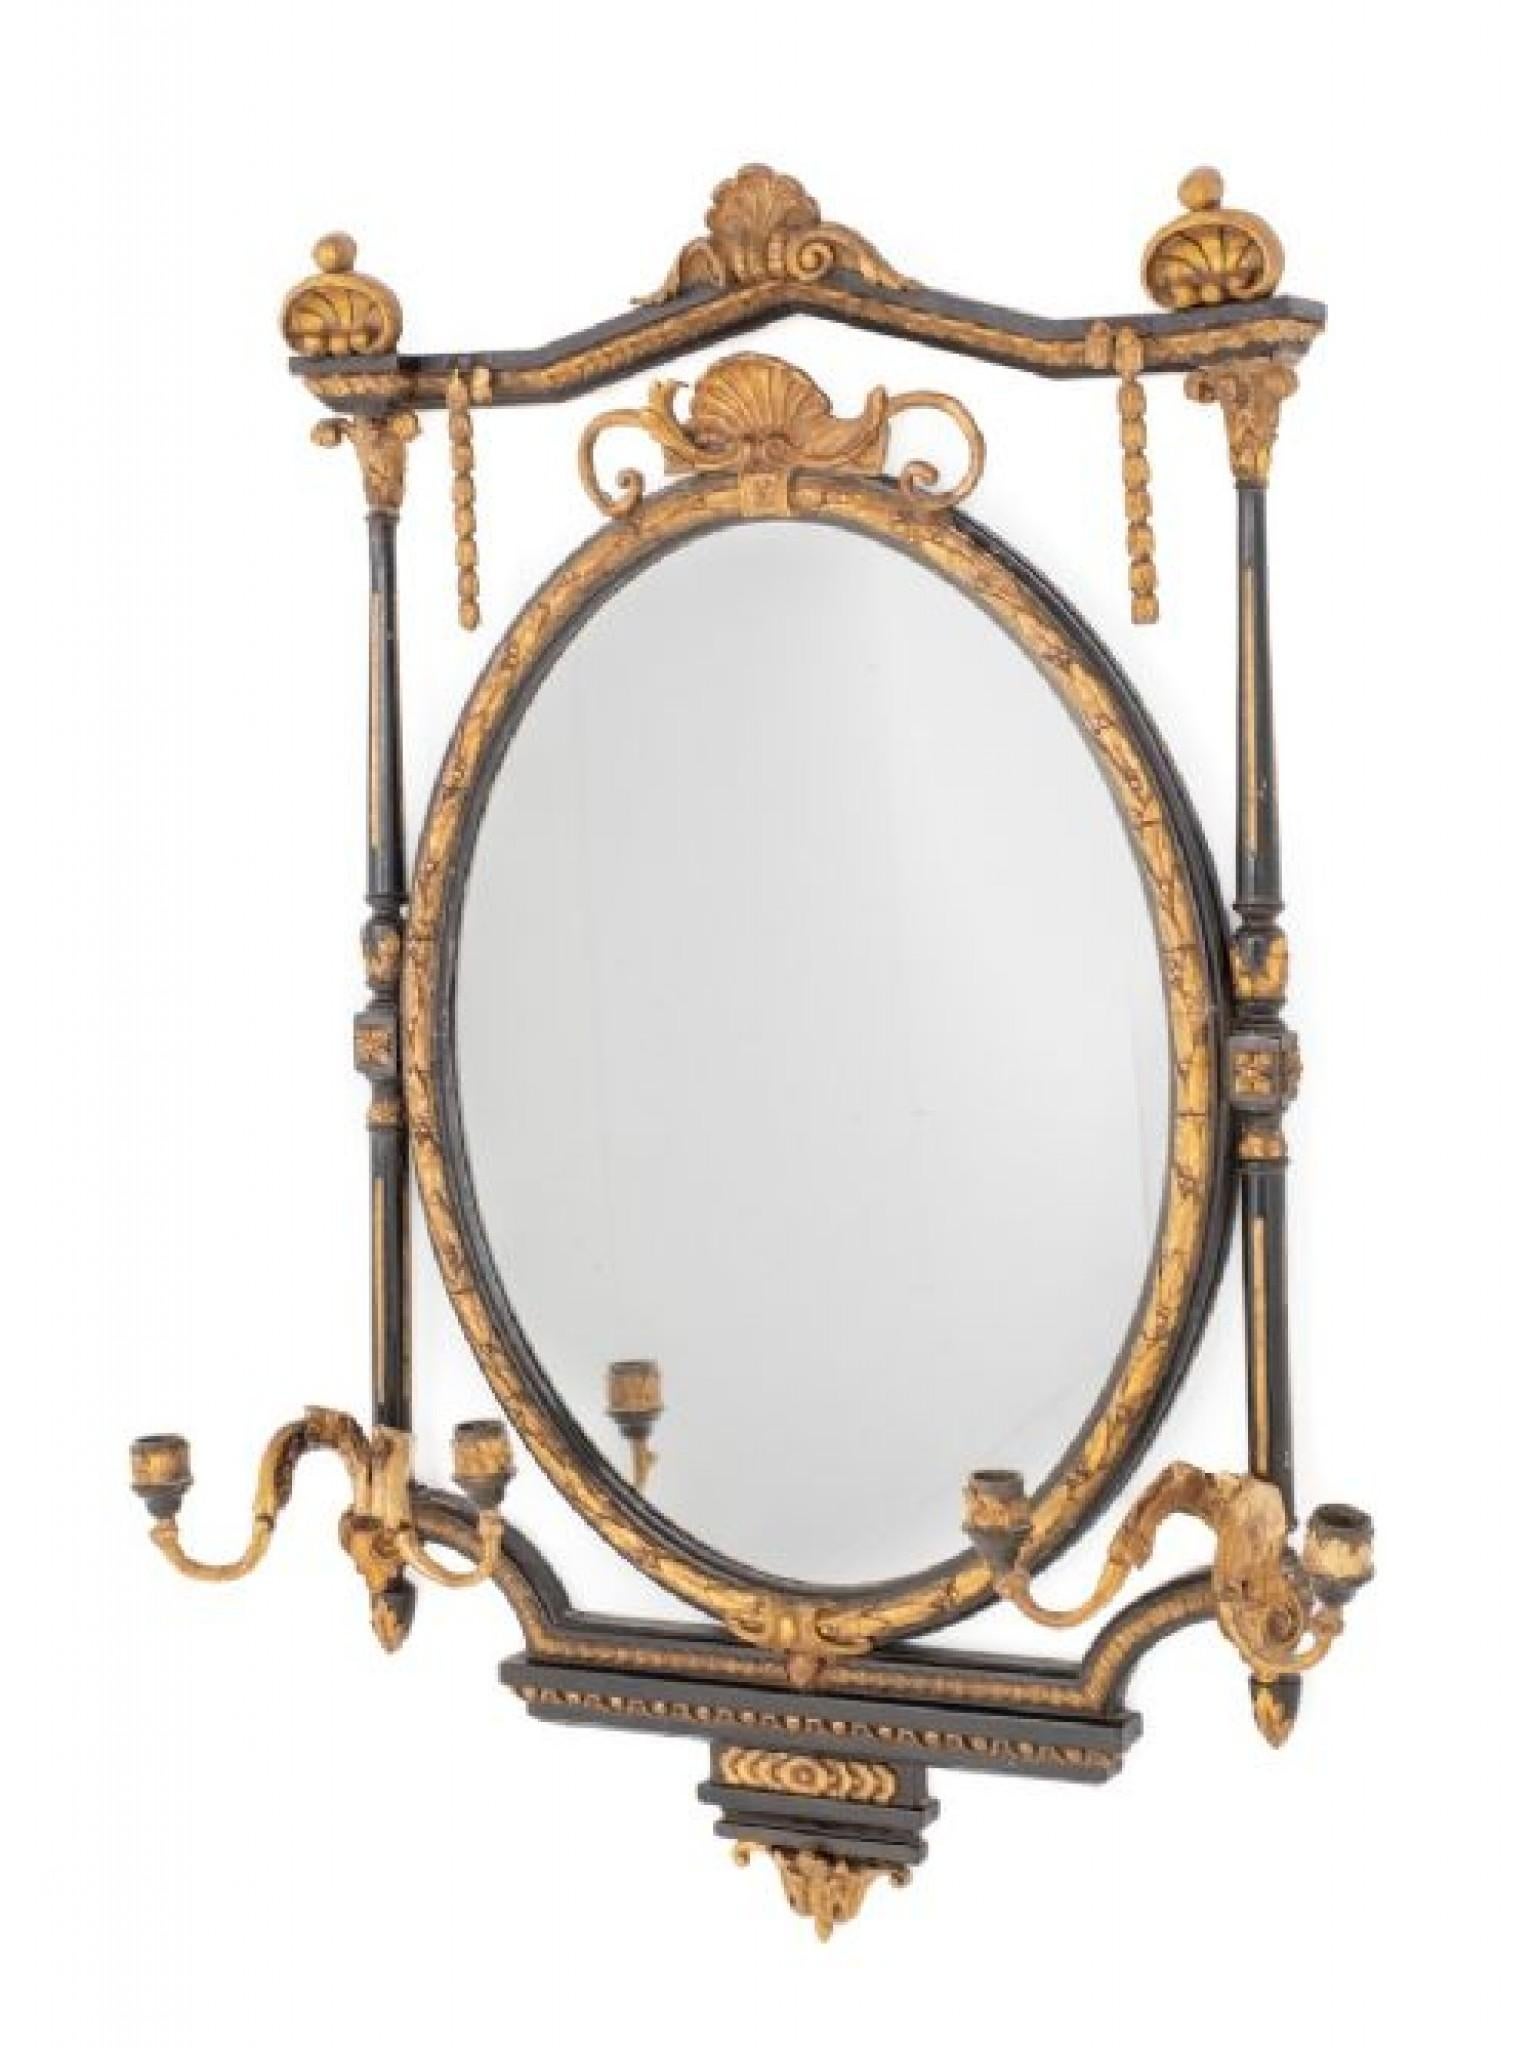 Stylish Regency Ebonised and Gilt Wall Mirror
Please scroll through for more pix - this ships anywhere, please get in touch
Period Regency mirror, looks like it has come off the set of Bridgerton
This Mirror Has an Oval Frame. 
The Mirror Features 2